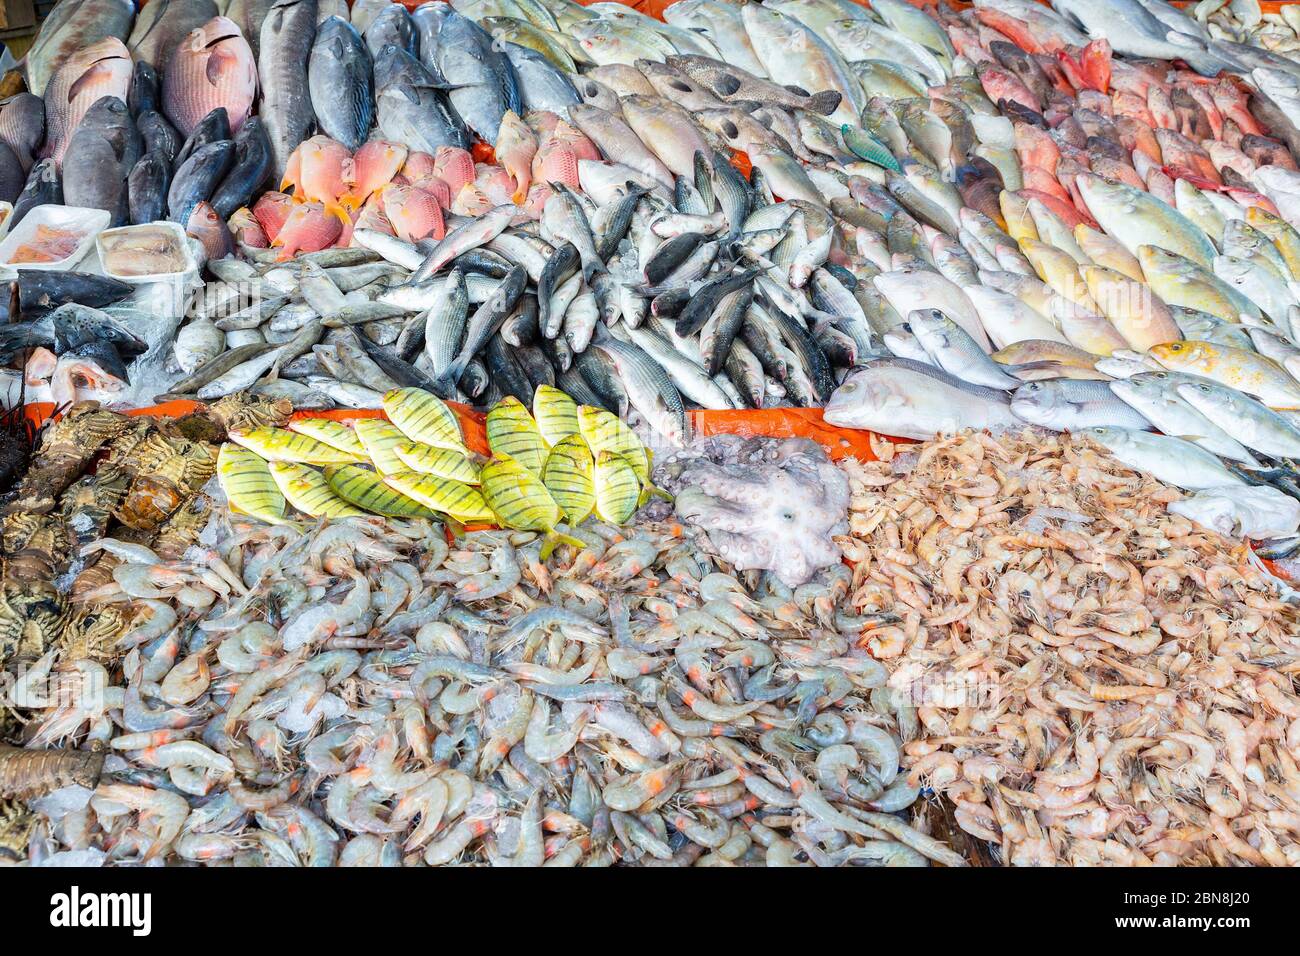 Heap of many saltwater fish sold on market Stock Photo